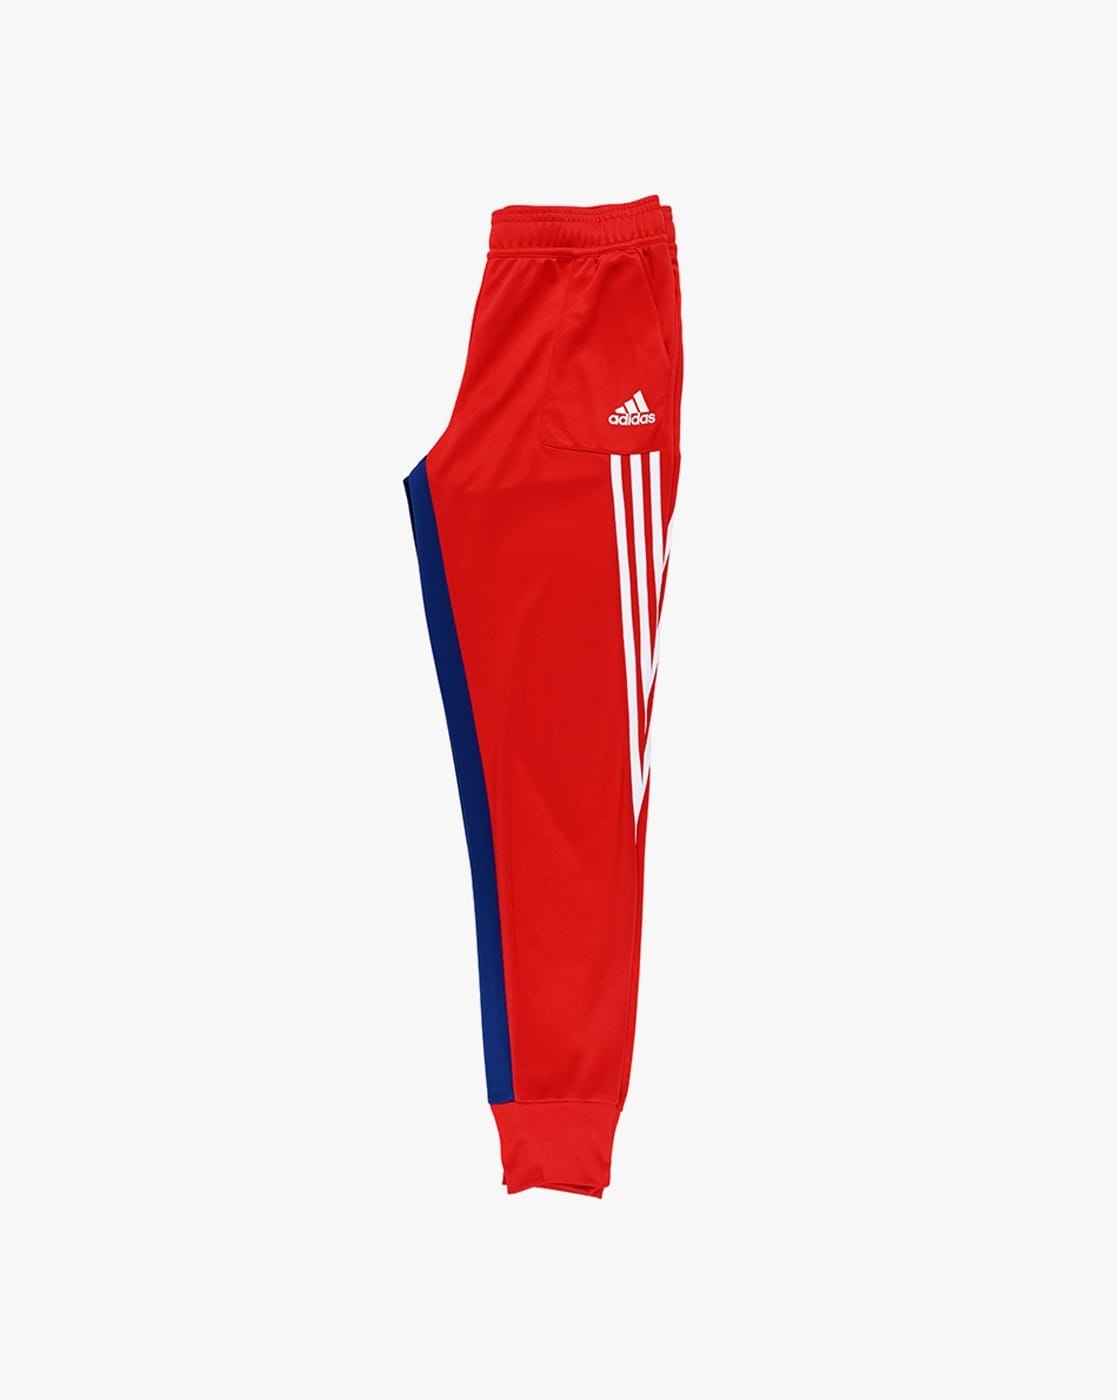 Adidas Tracksuit Day 2015  Adidas outfit men Red adidas tracksuit Adidas  outfit